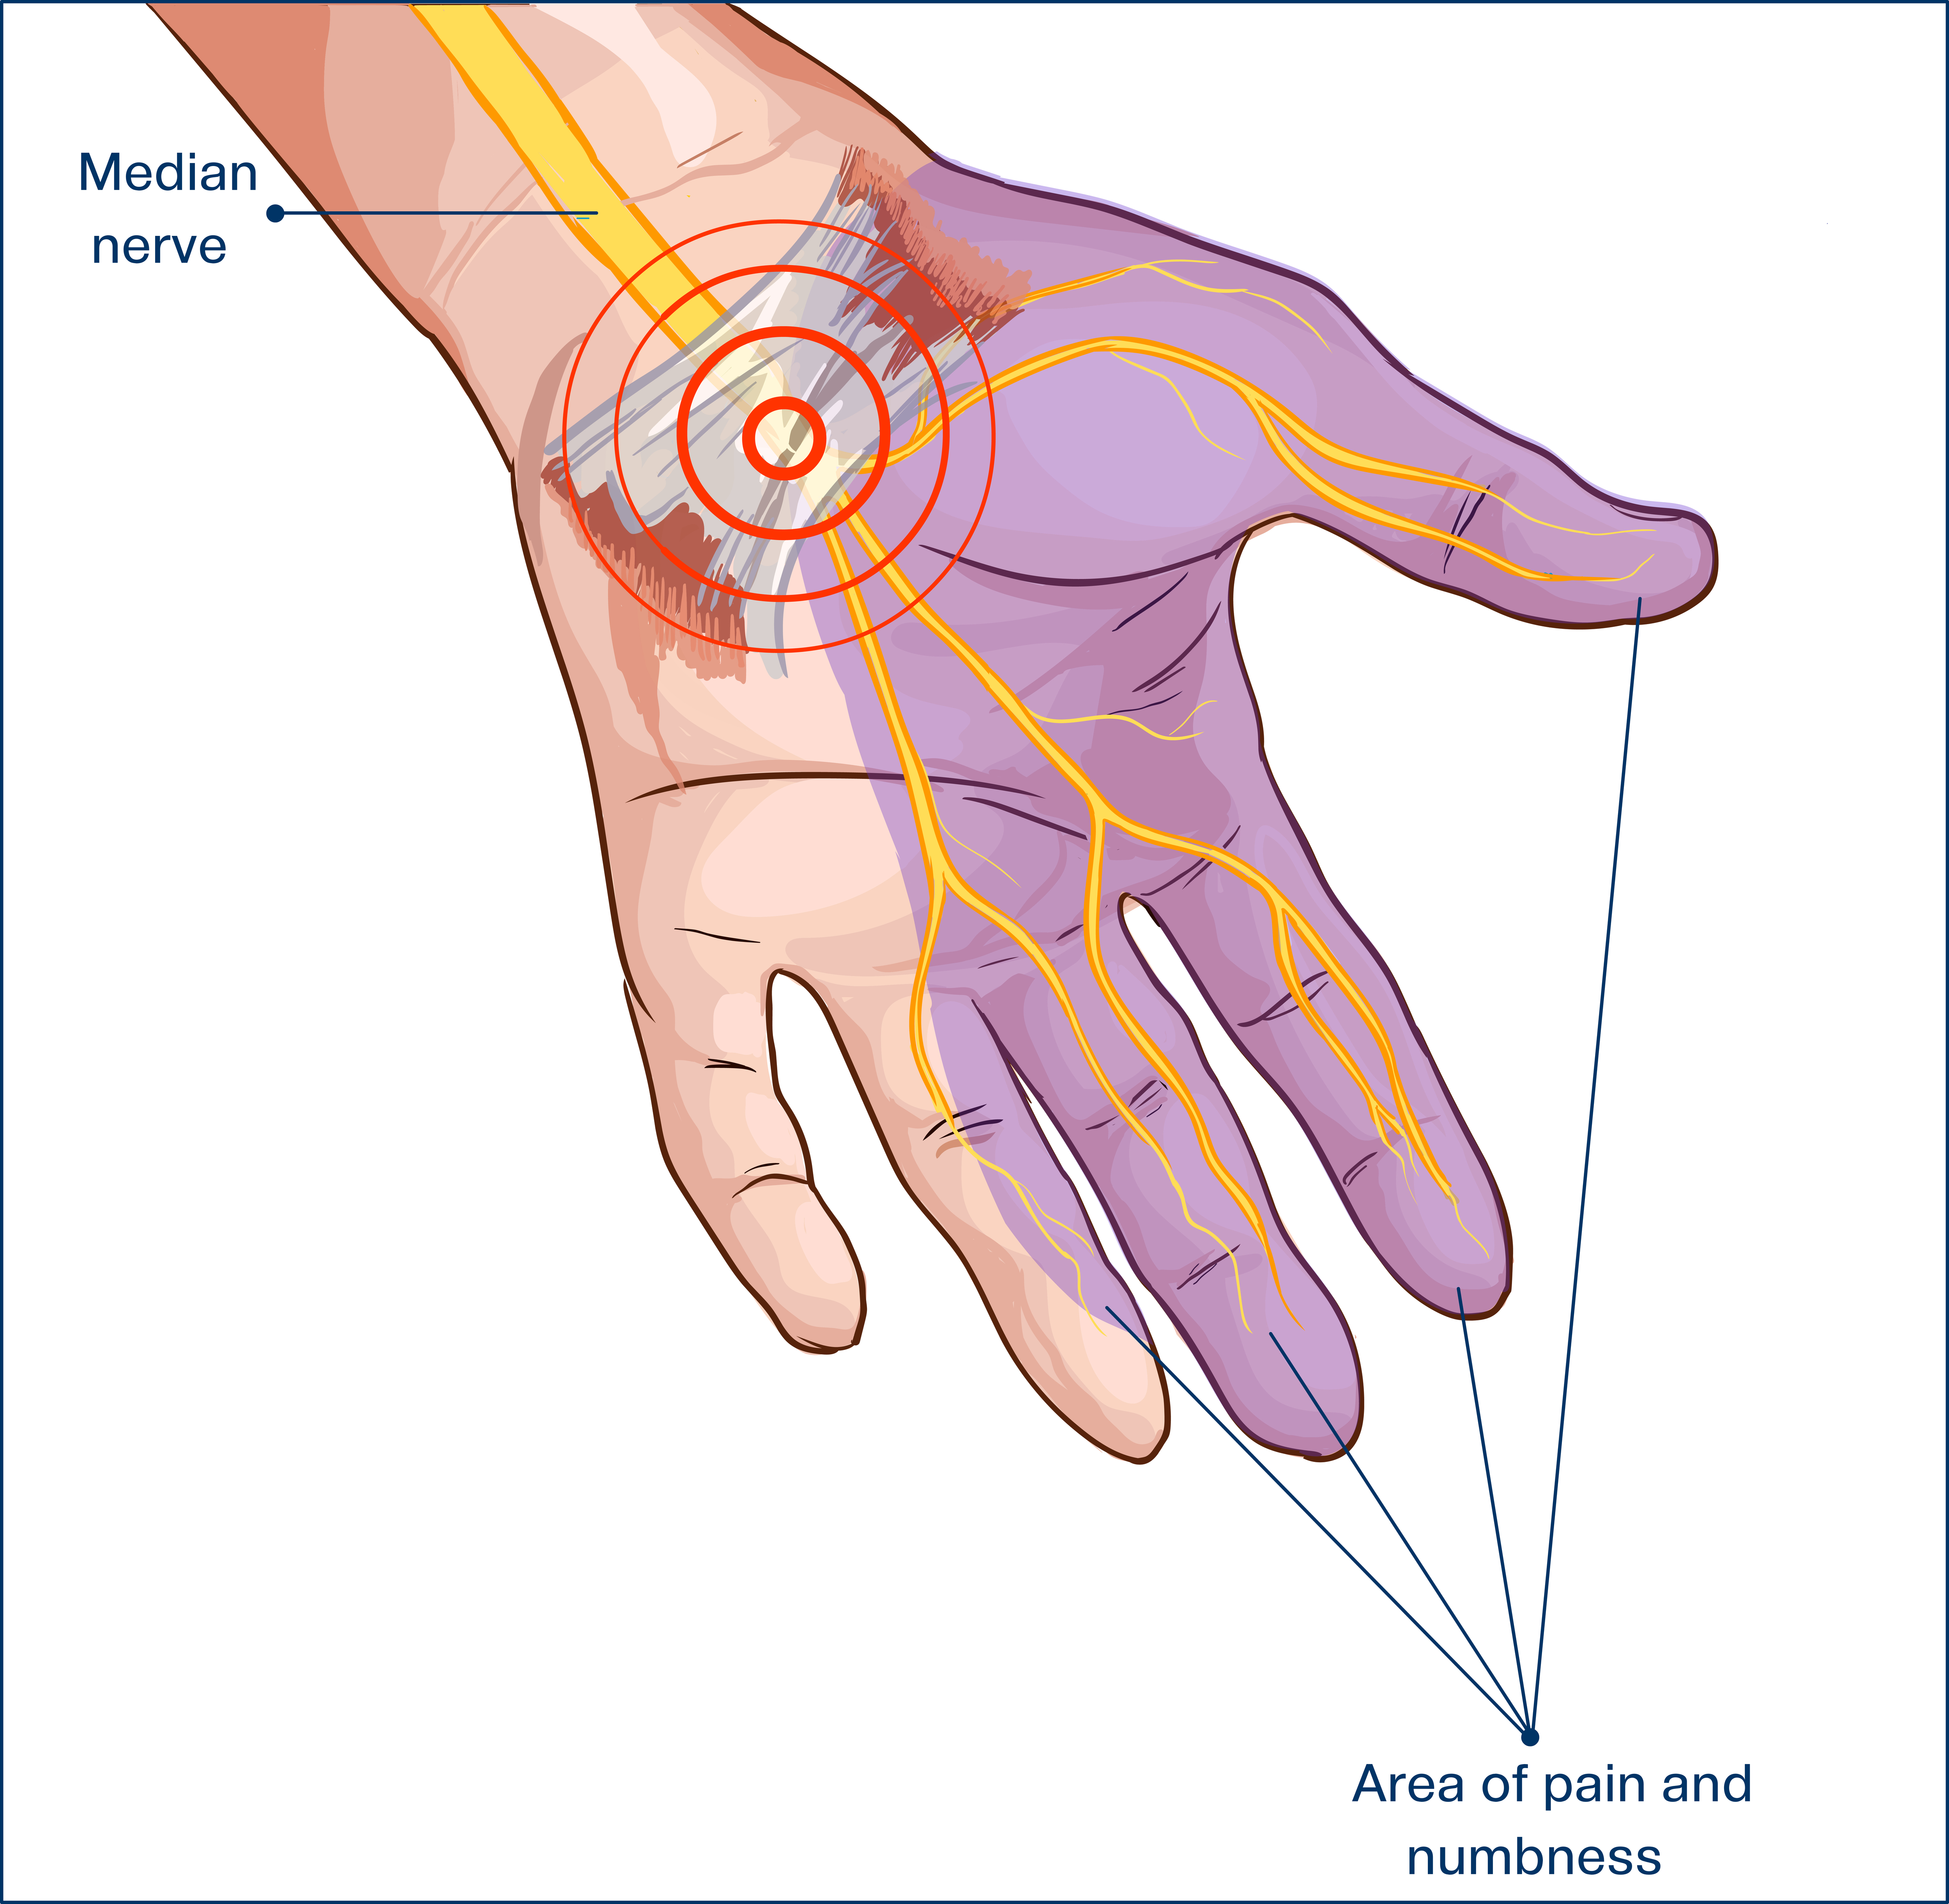 Carpal Tunnel Syndrome - My Family Physio